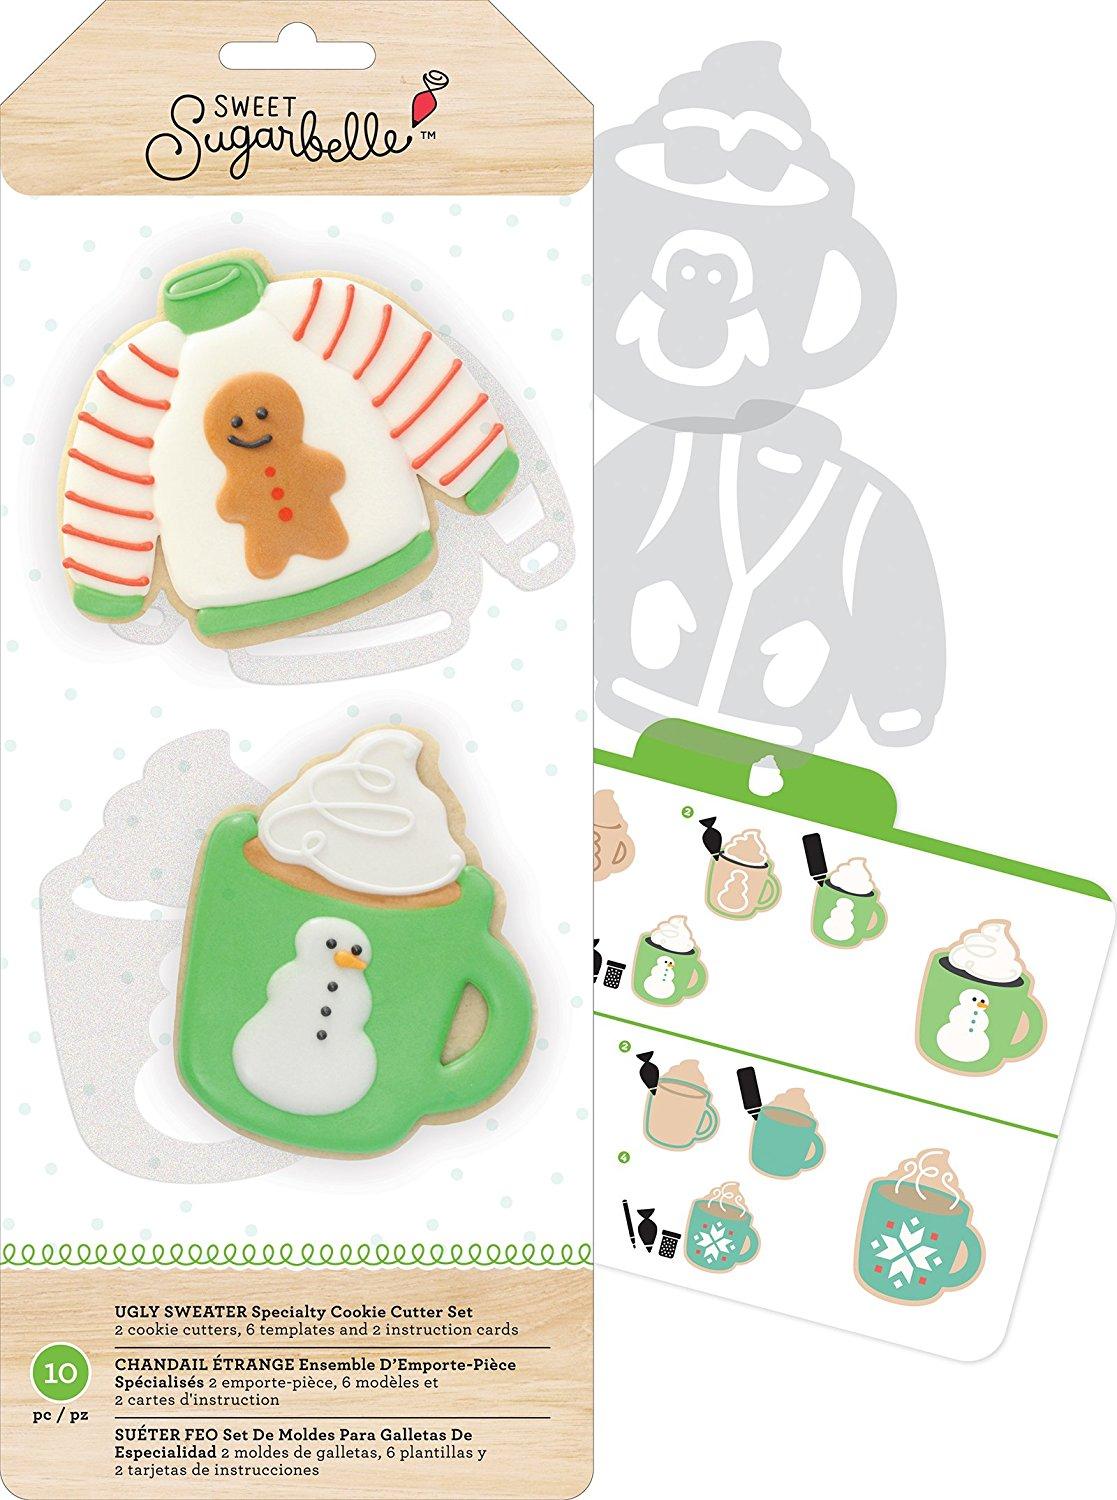 Sweet Sugarbelle Speciality Cookie Cutters, Ugly Christmas Sweater and Hot Chocolate Mug